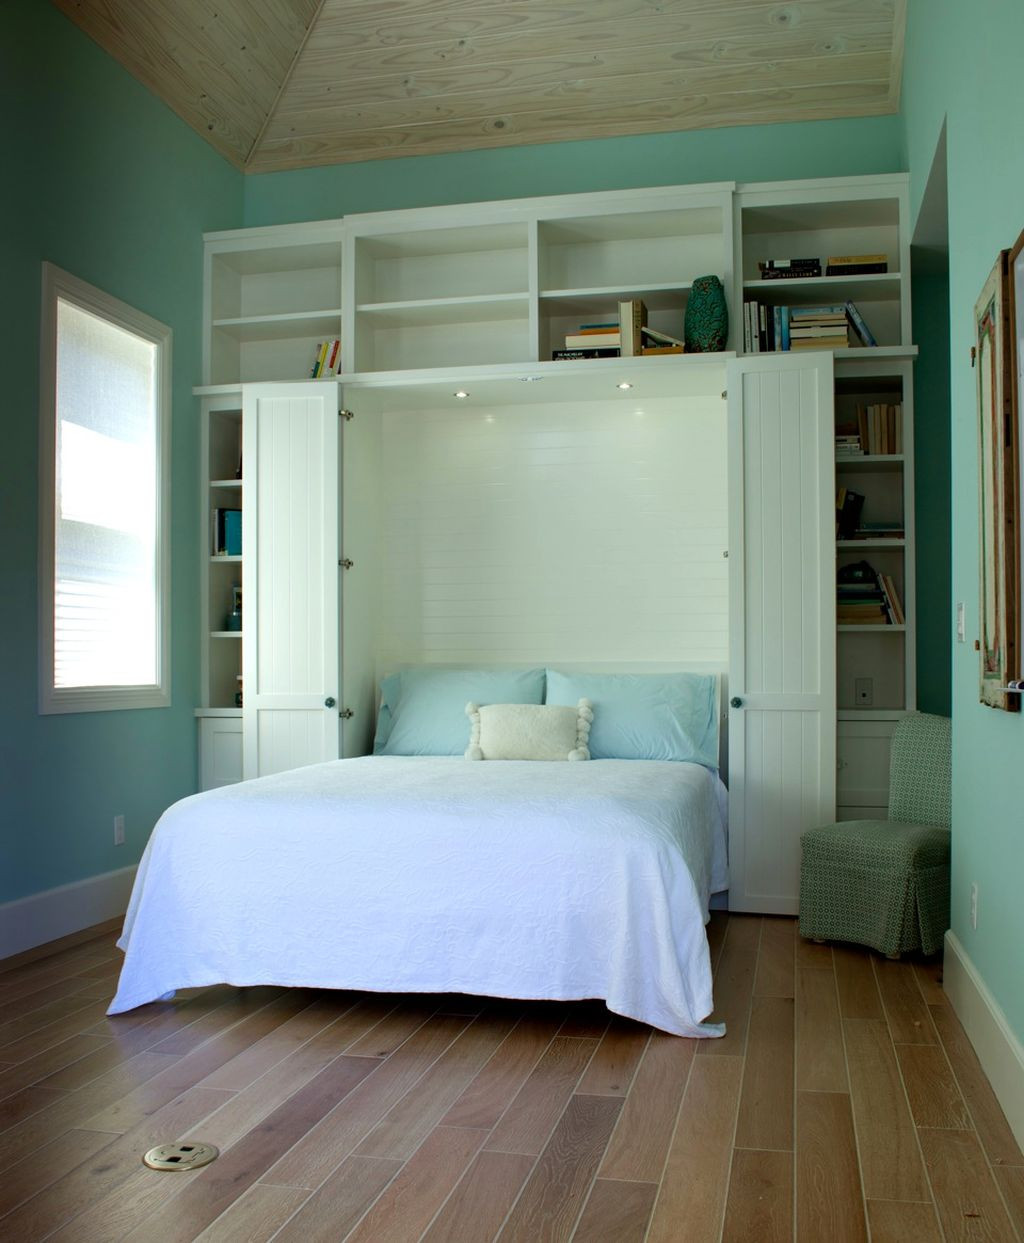 Small Space Bedroom
 20 Space Saving Murphy Bed Design Ideas for Small Rooms